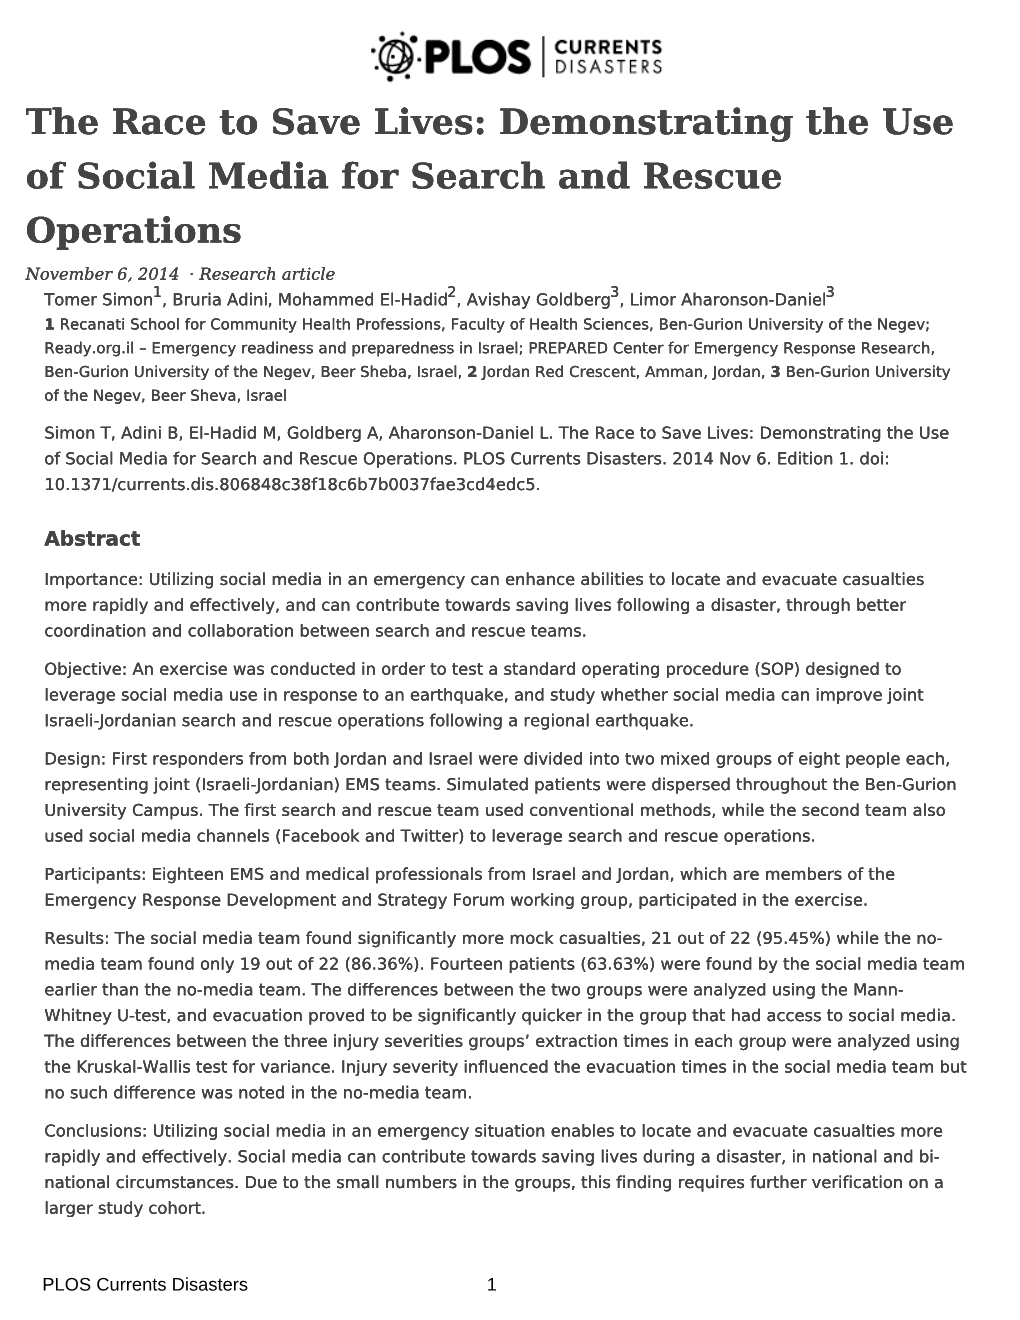 The Race to Save Lives: Demonstrating the Use of Social Media for Search and Rescue Operations